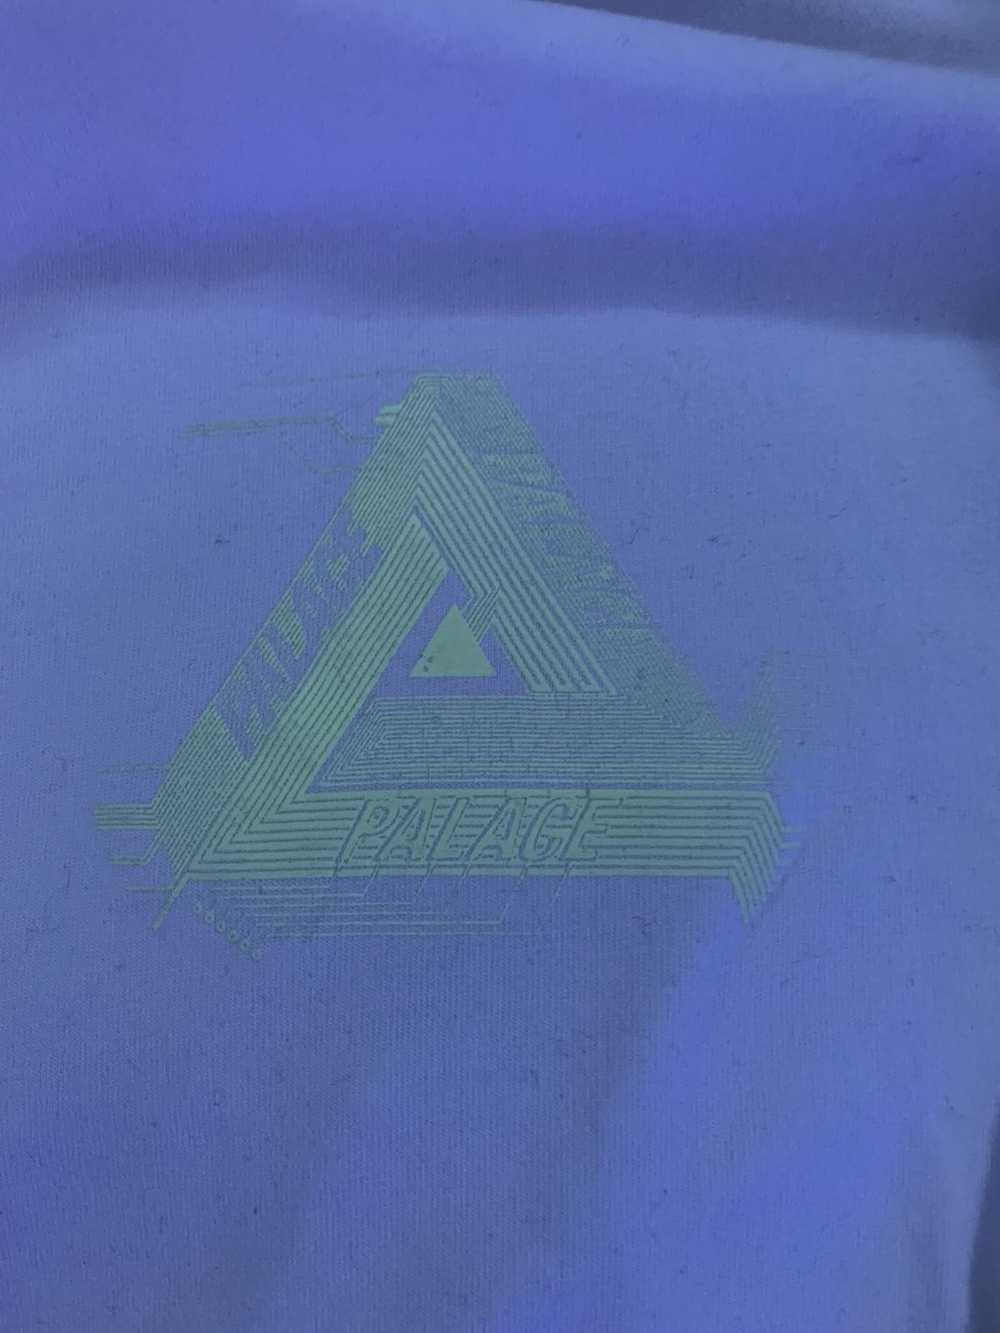 Palace Palace Tri Ferg Glow in the Dark - image 3